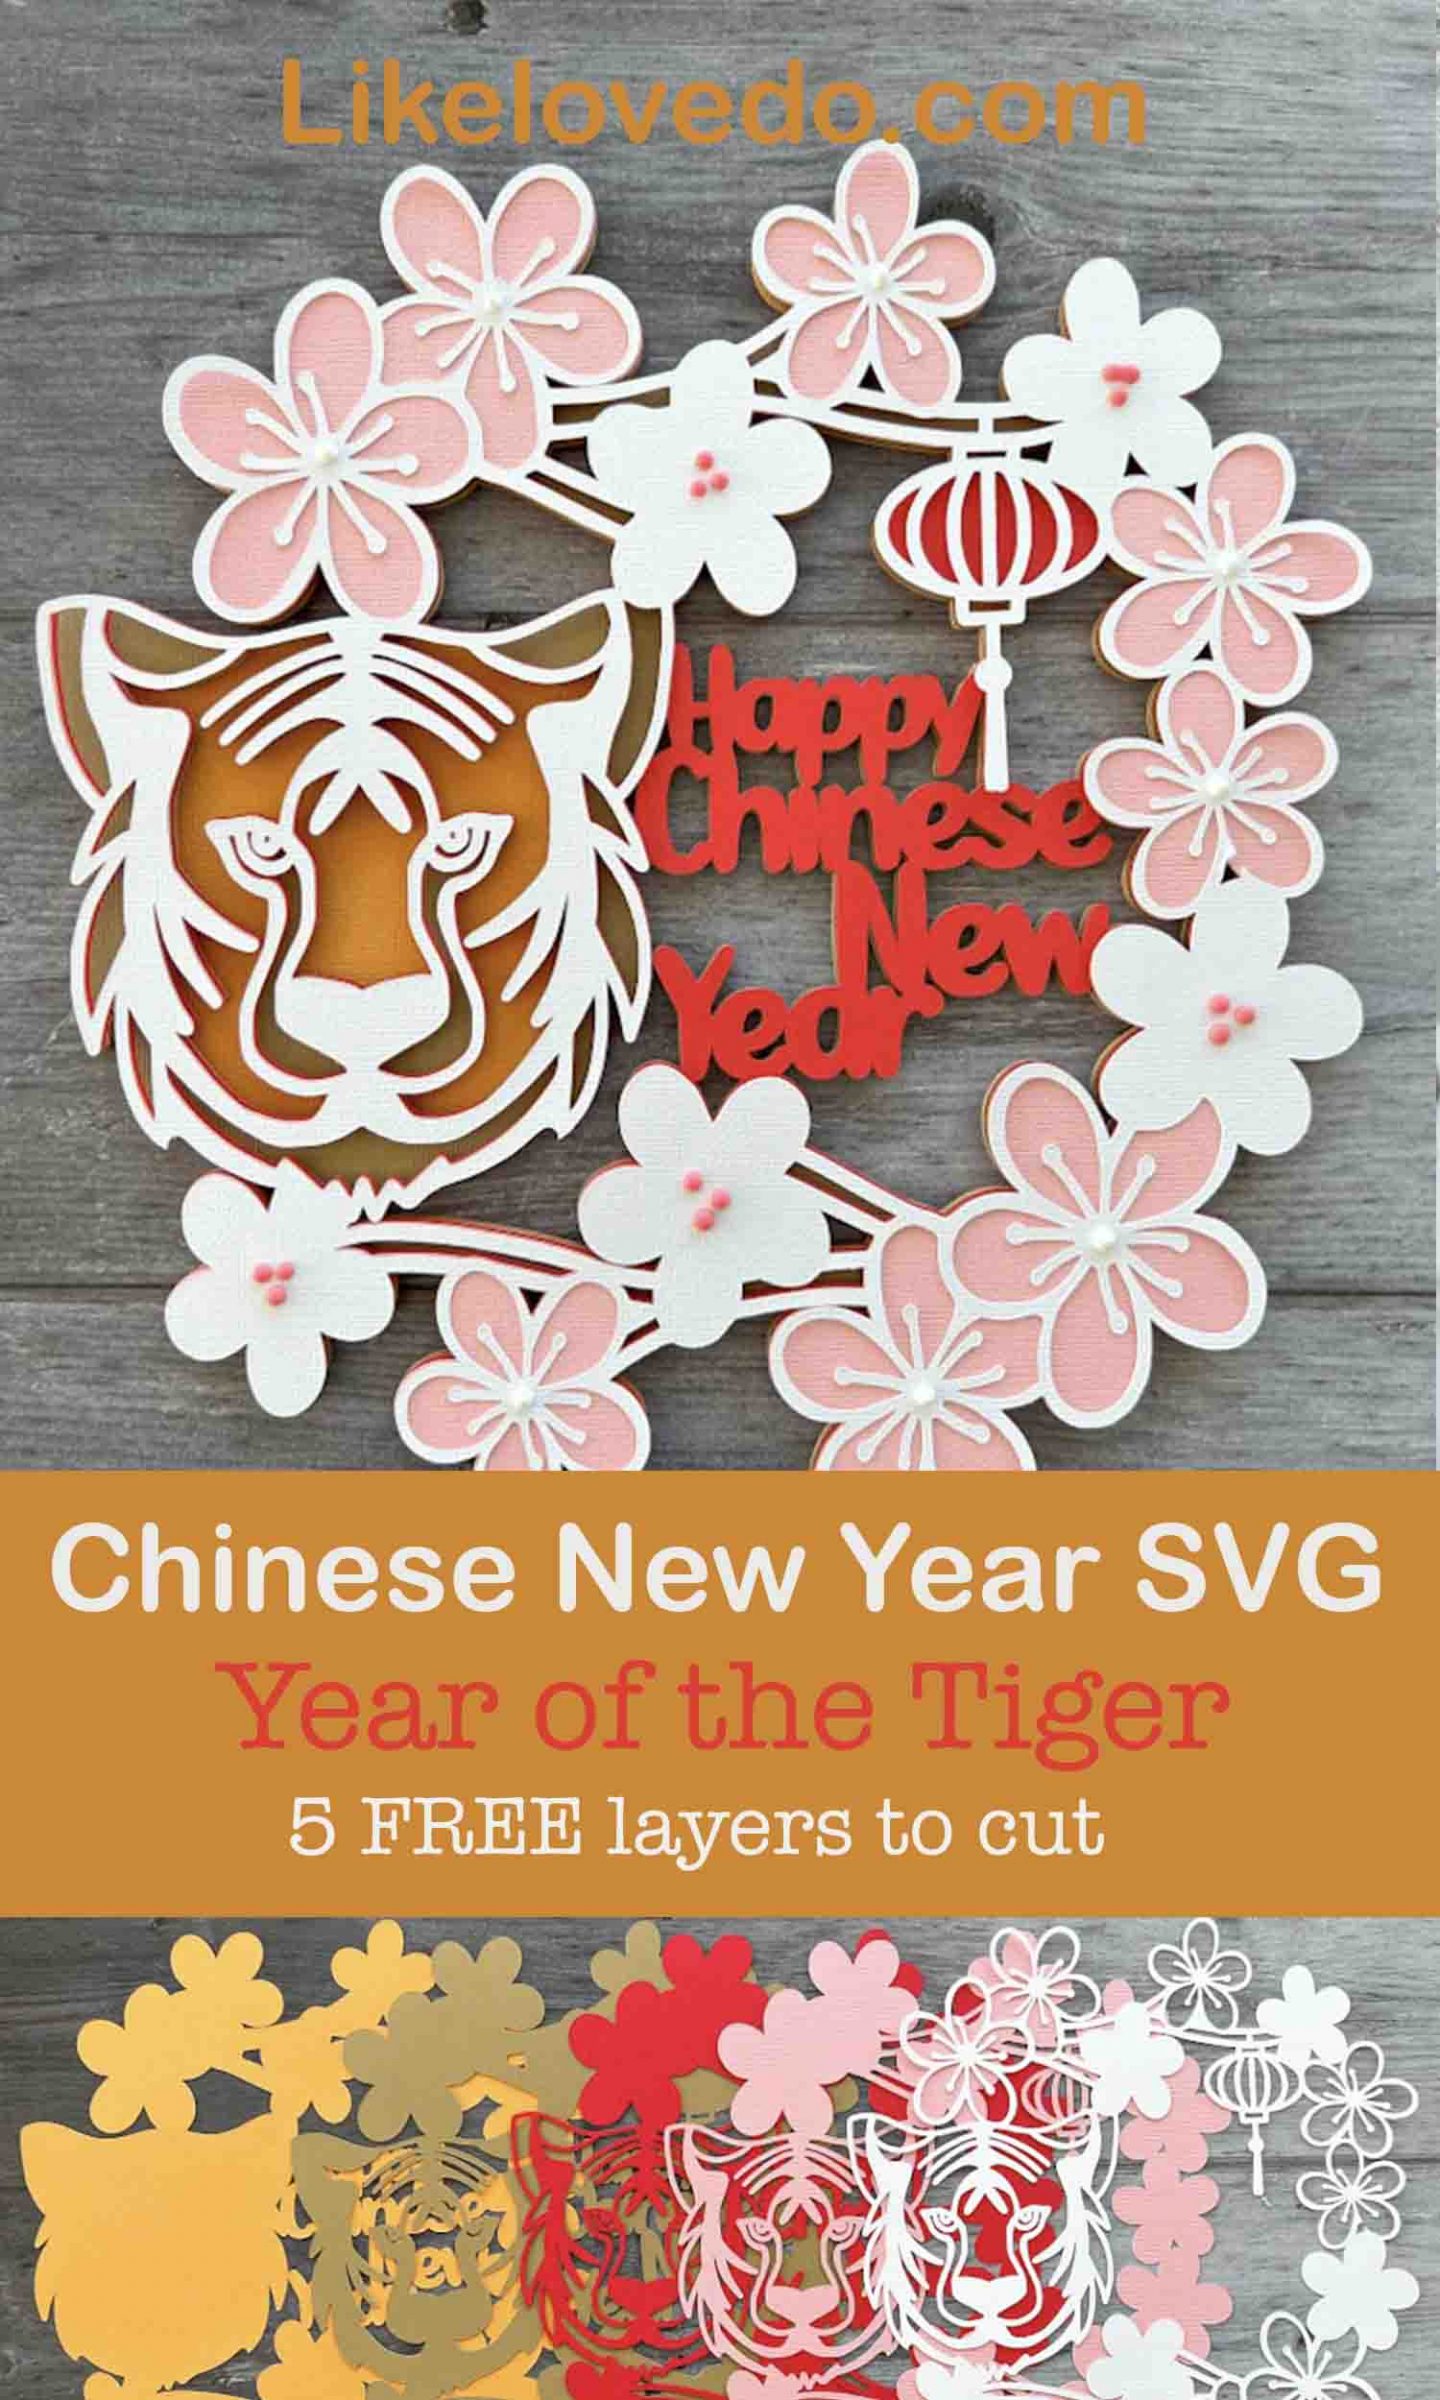 Free Layered Year of the Tiger Happy Chinese New Year SVG for all of your paper crafts and Scrapbooking pin image